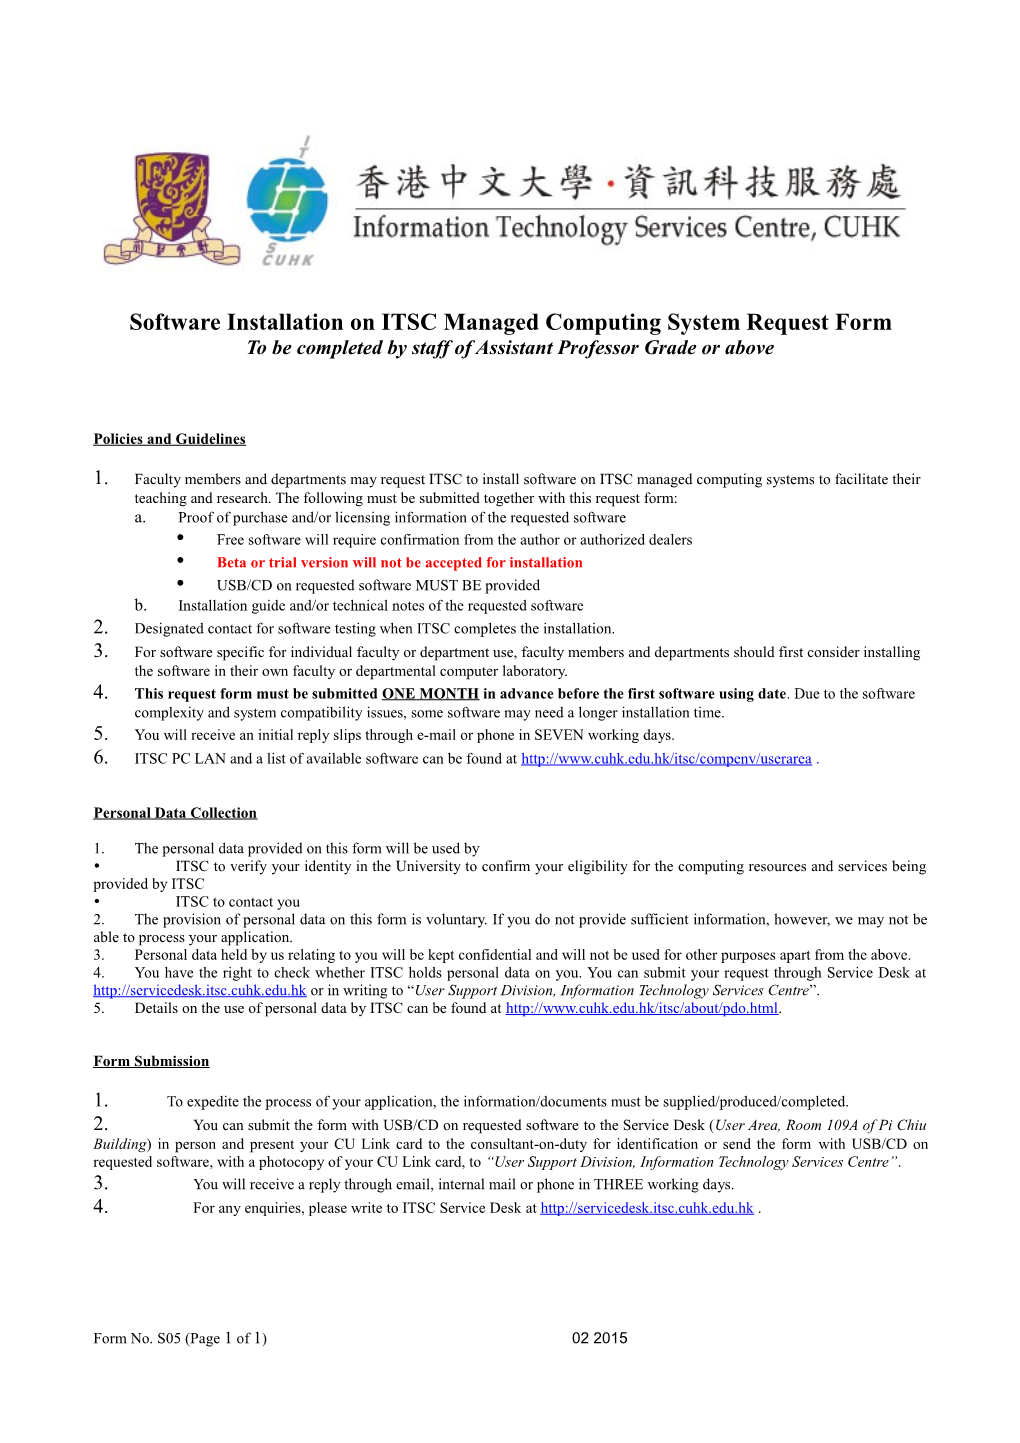 Software Installation on ITSC Managed Computing System Request Form